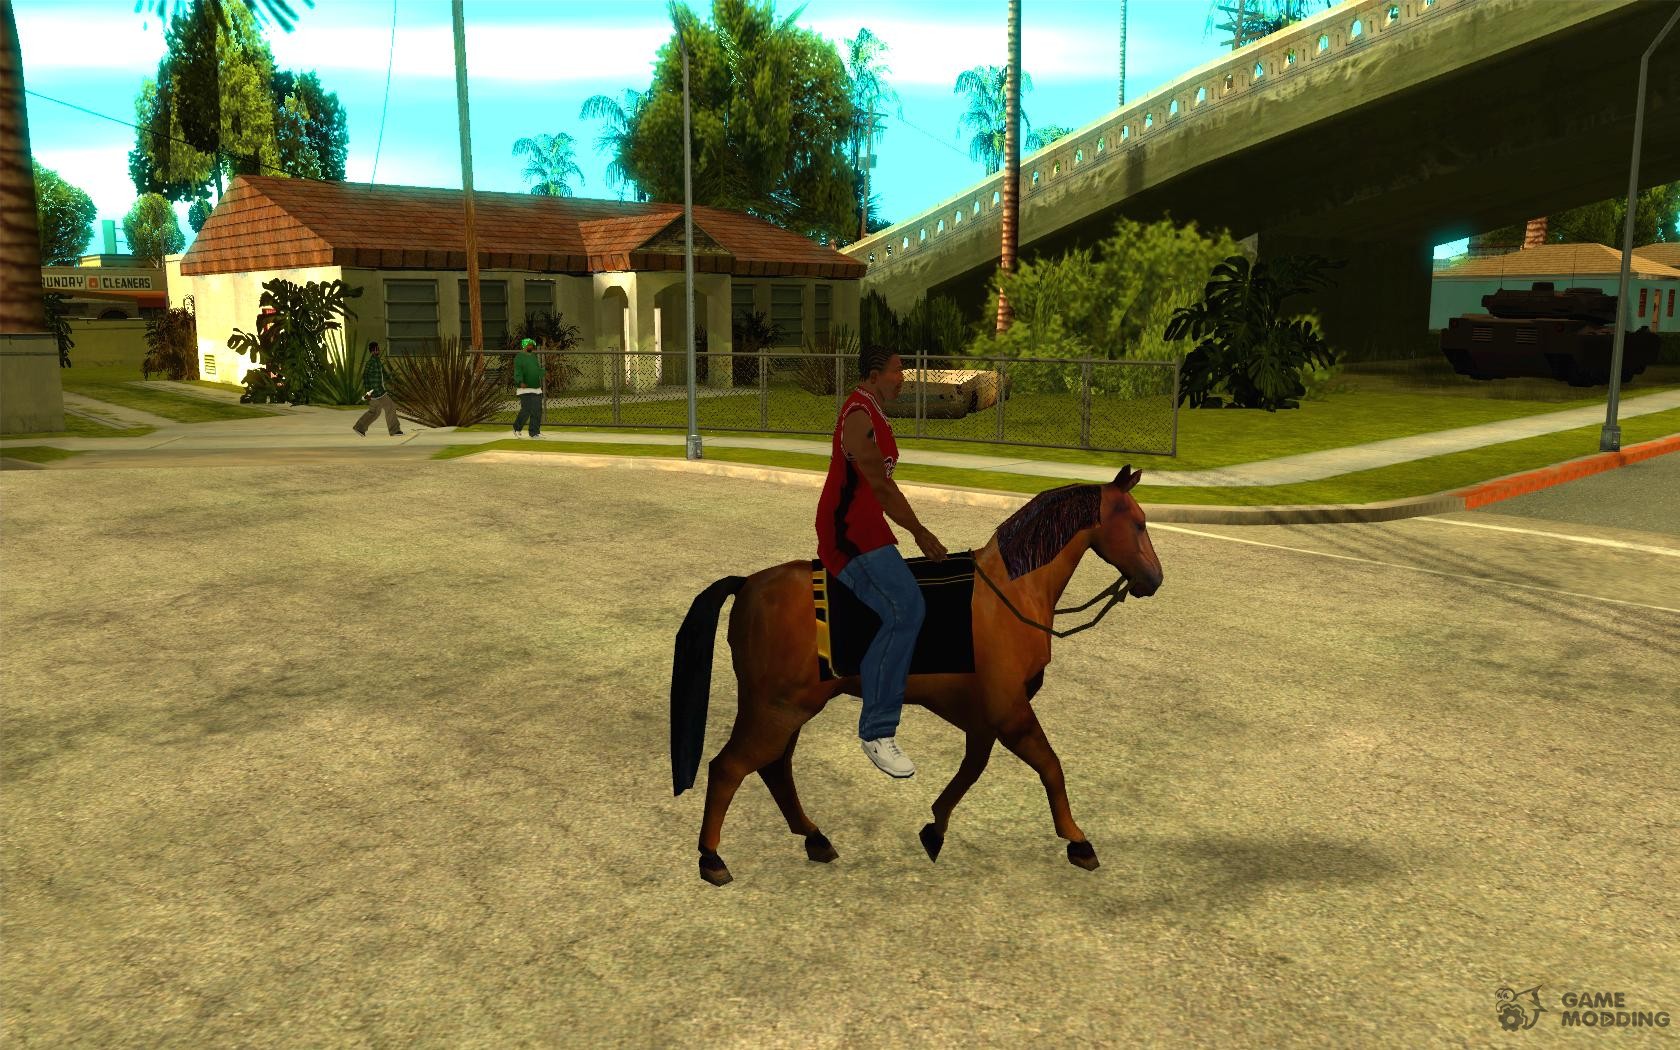 Gta san andreas horse betting glitch in the matrix bigcoin cryptocurrency